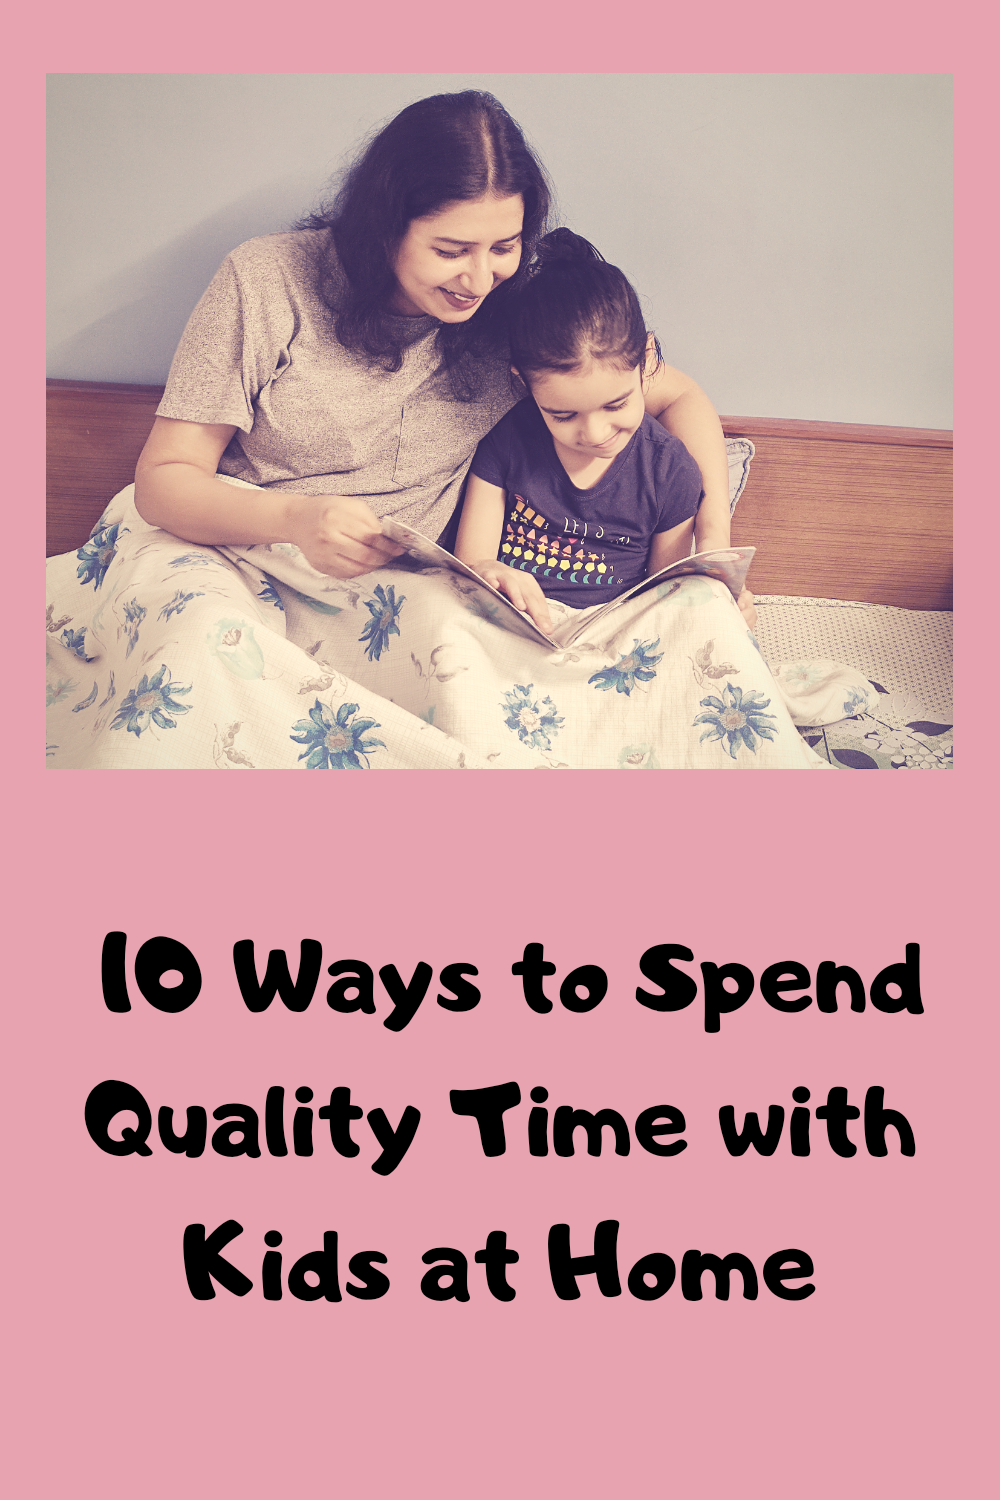 Ways to spend quality time with kids at home